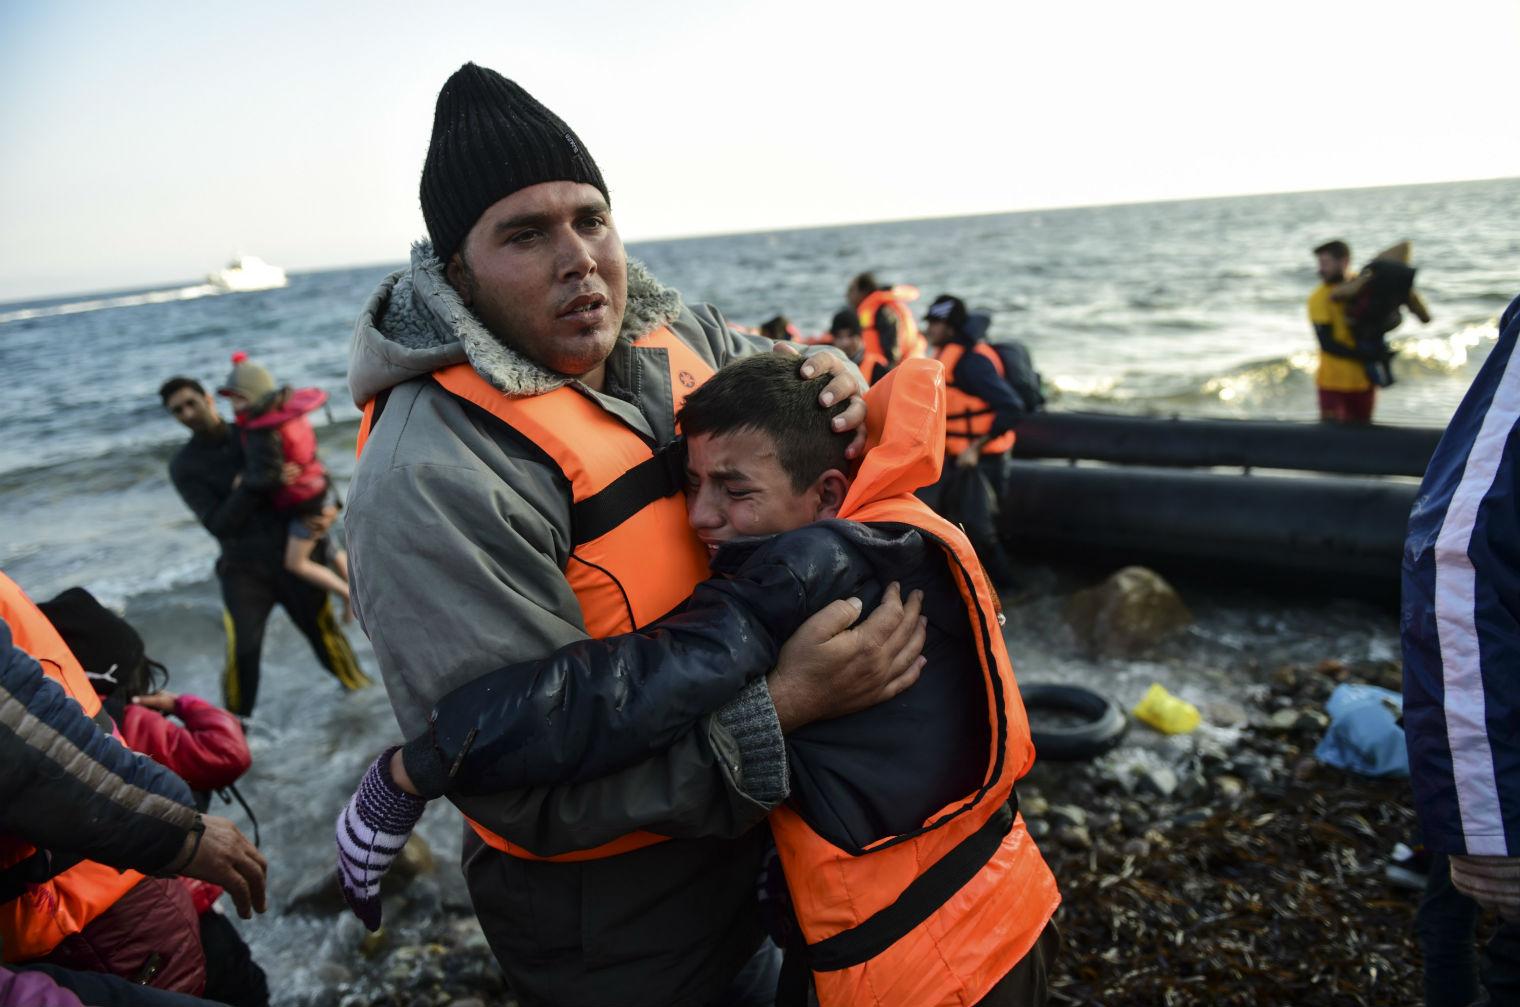 People arriving on the Greek island of Lesbos on November 17, 2015 (BULENT KILIC/AFP/Getty Images)